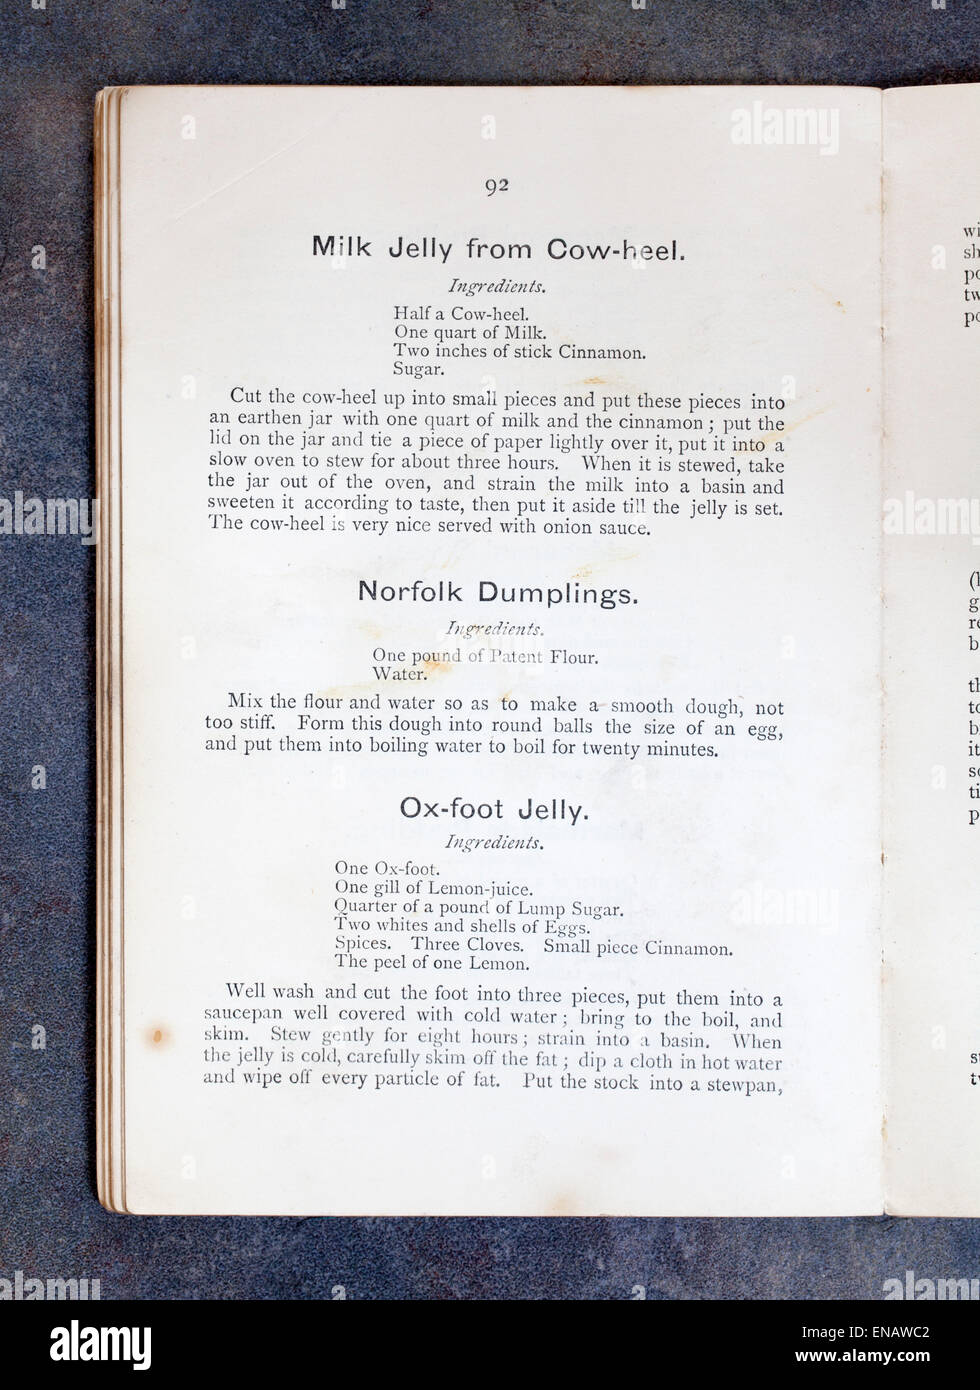 Milk Jelly from Cow Heel, Norfolk Dumplings and Ox Foot Jelly Recipes from Vintage Cookery Book Stock Photo